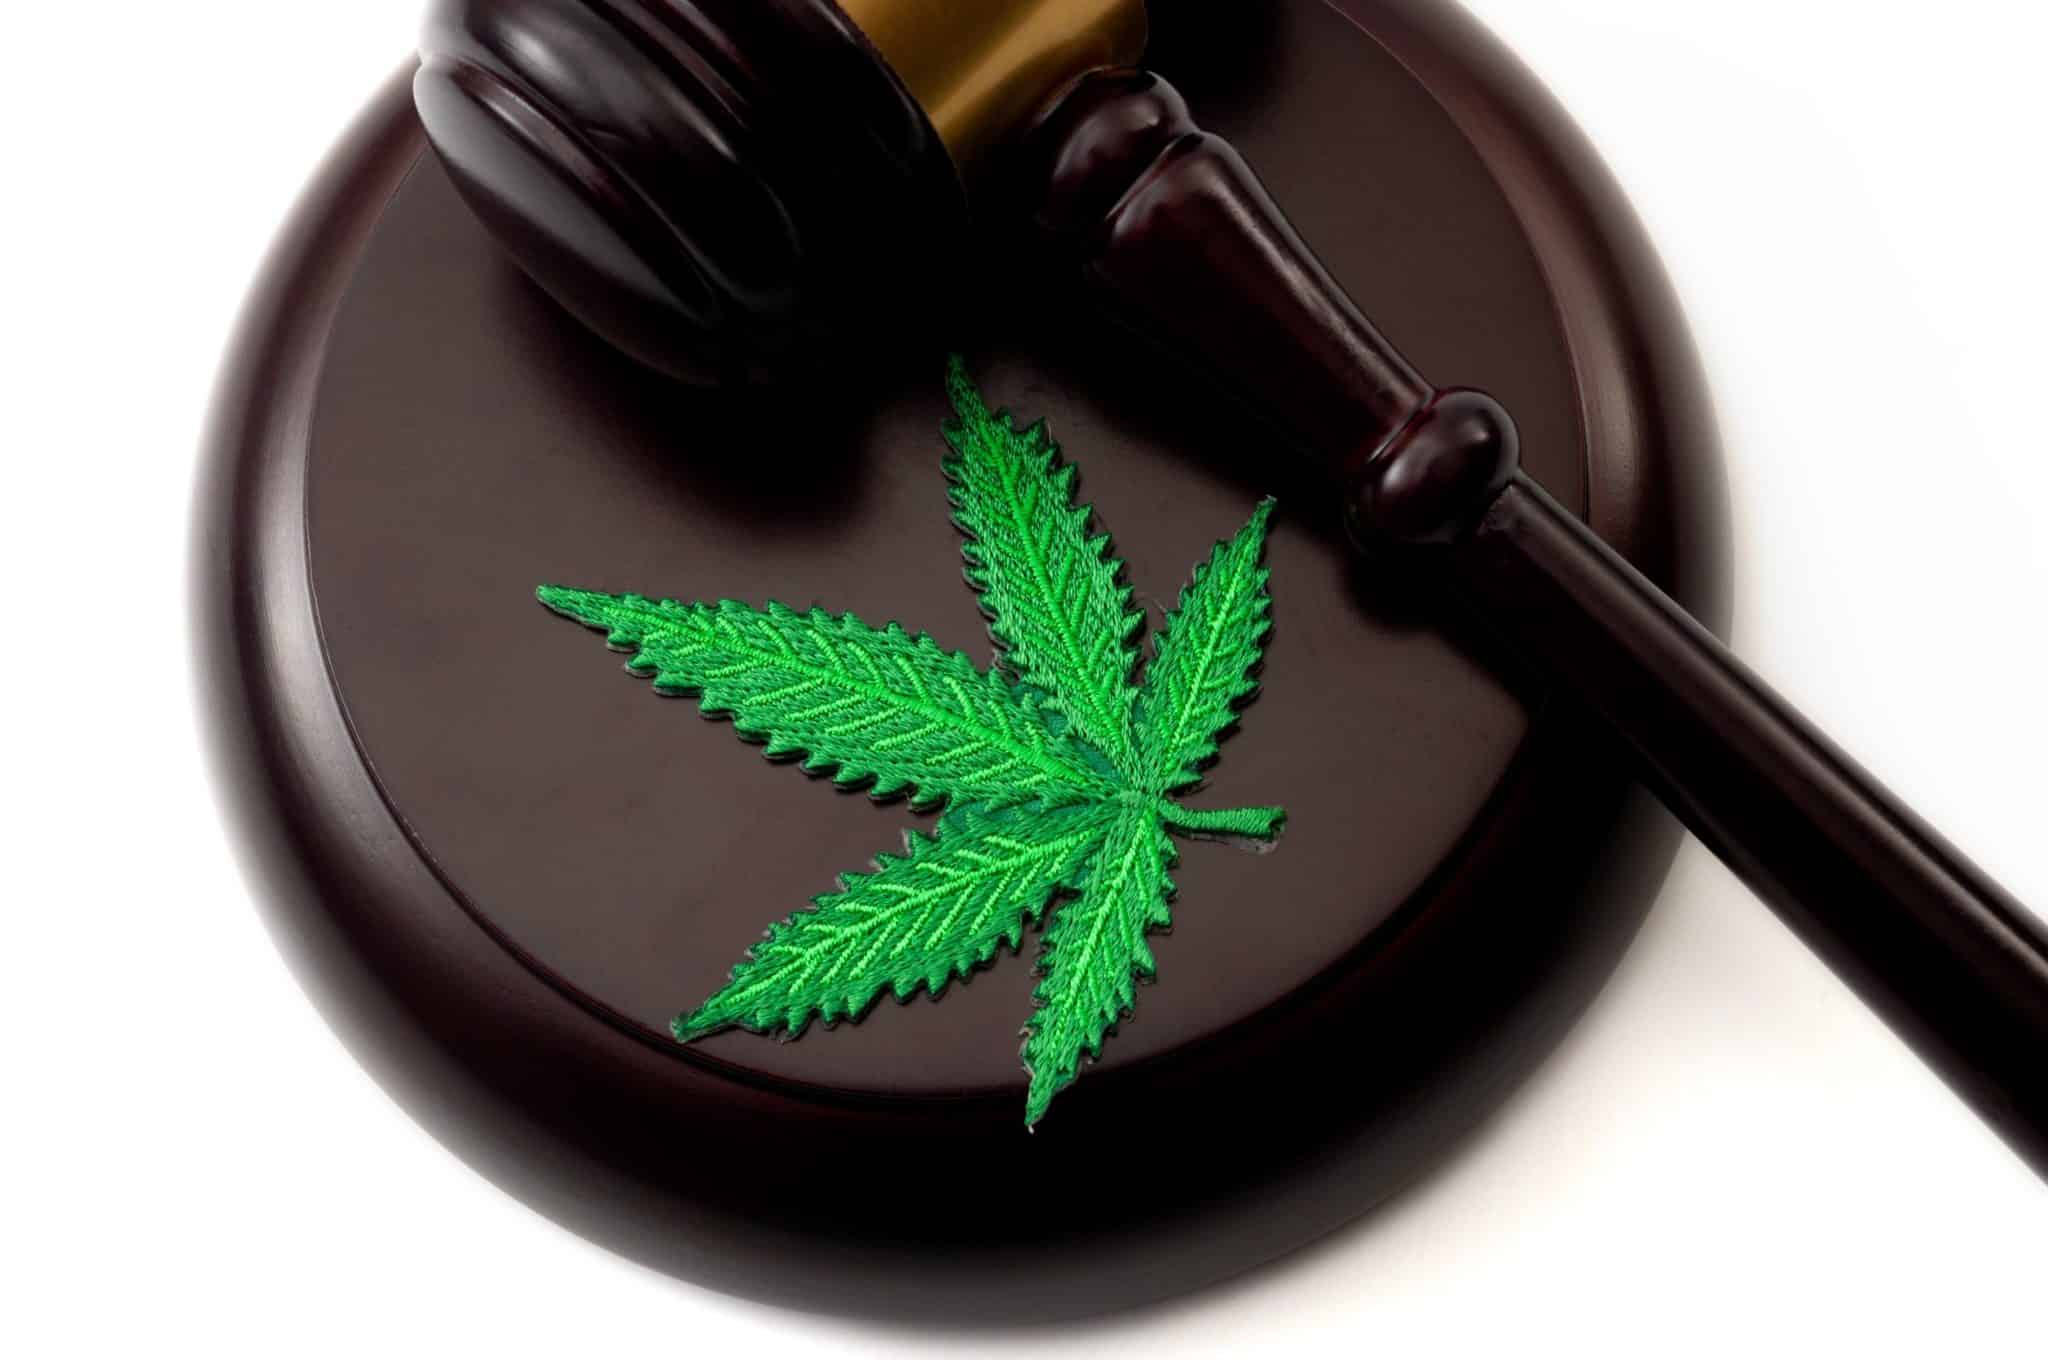 Texas Marijuana Laws: What You Need to Know